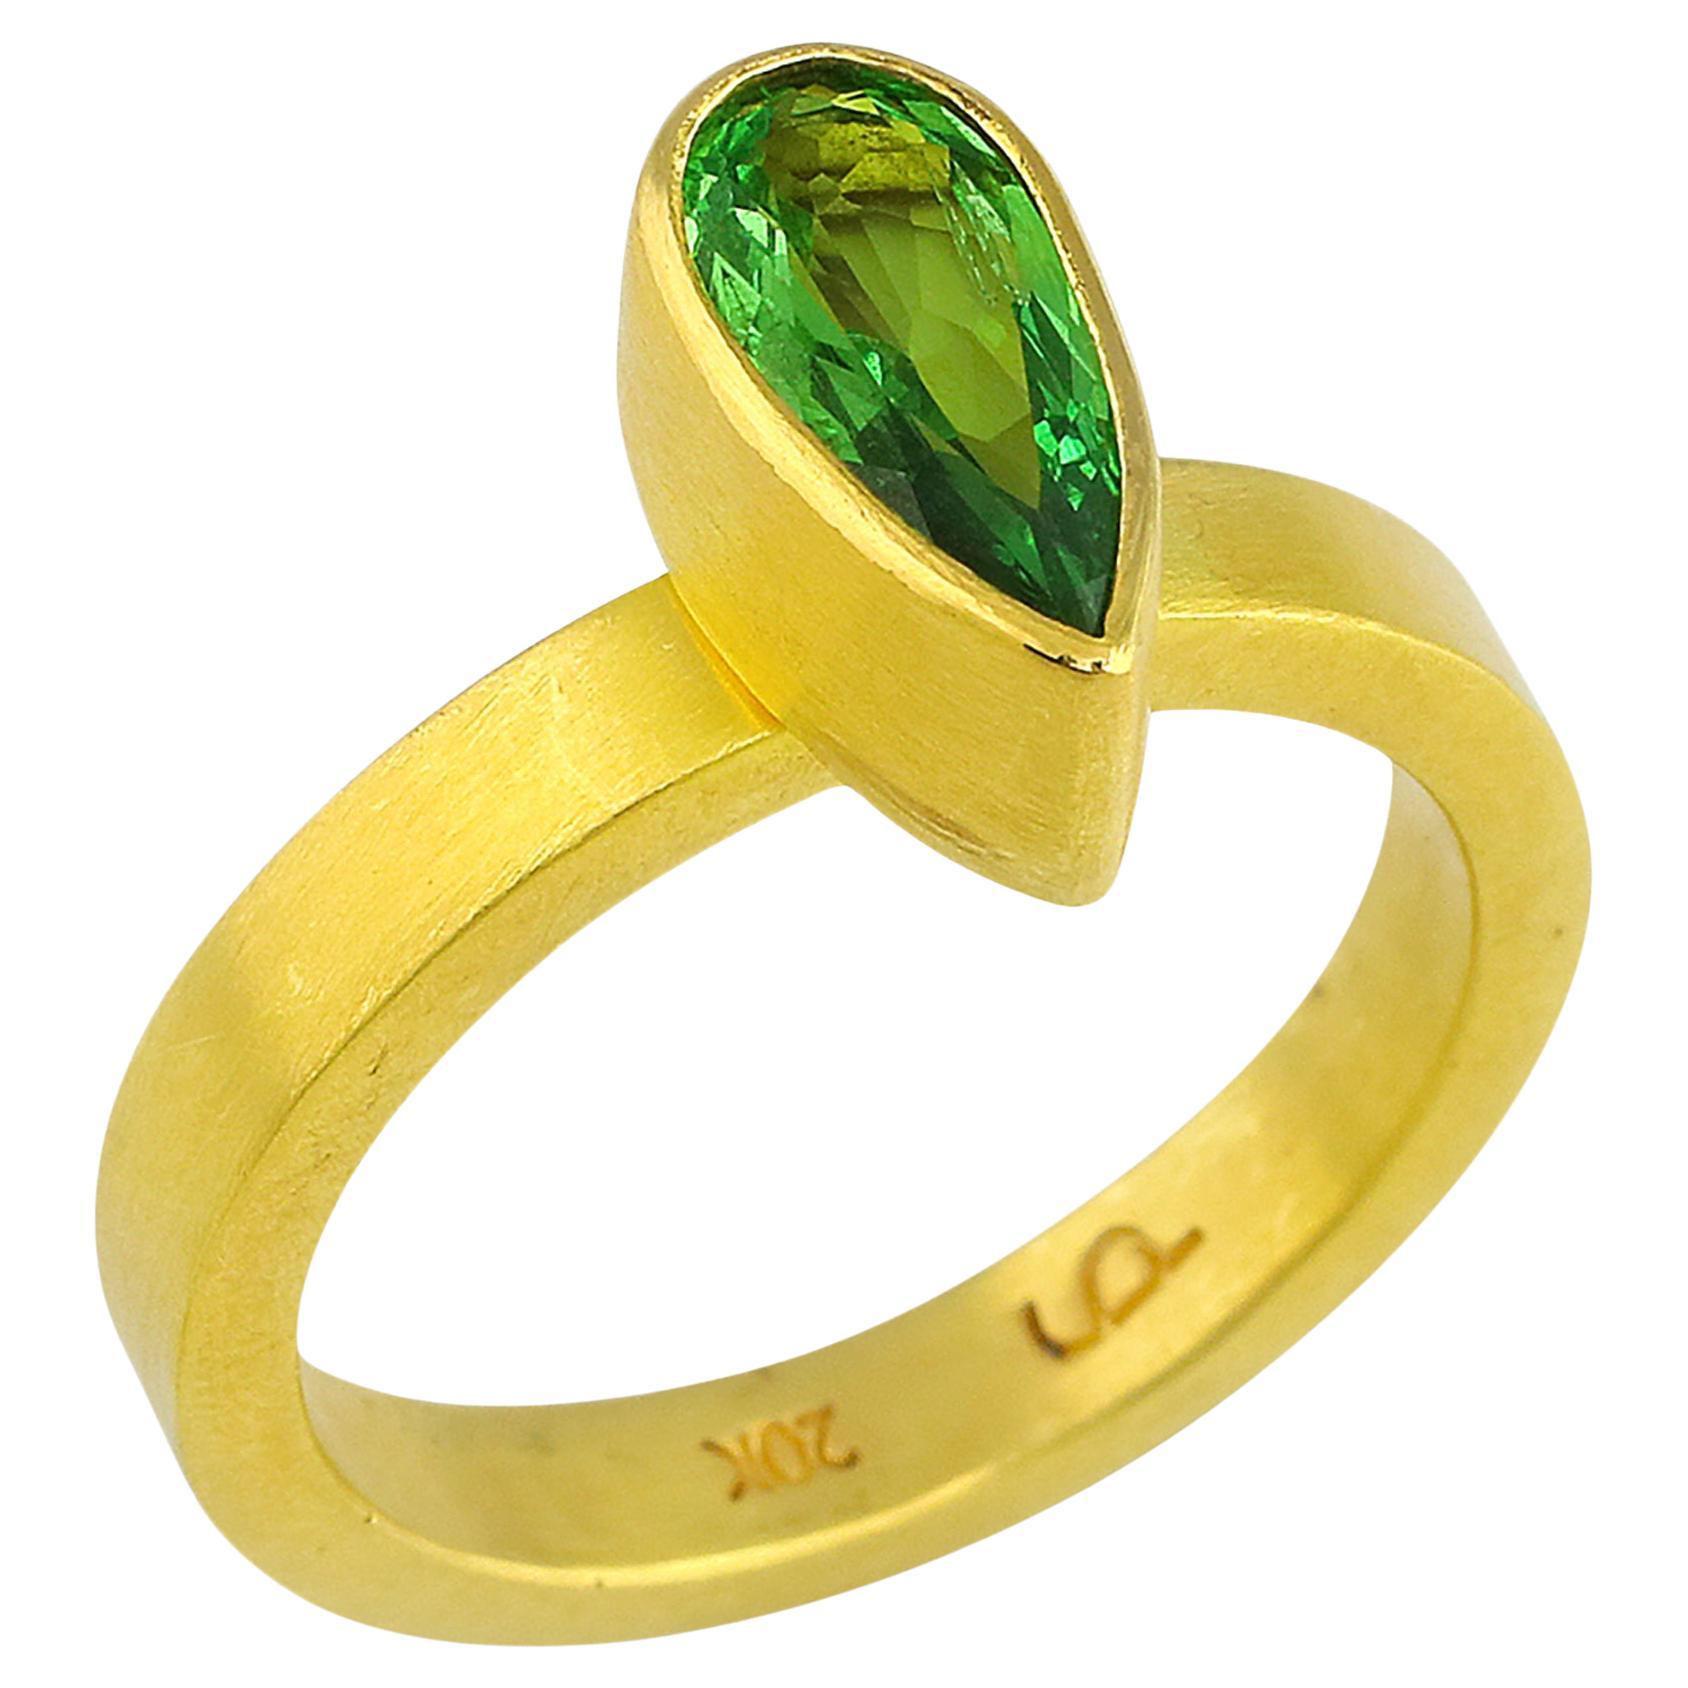 PHILIPPE SPENCER 1.02 Ct. Rare Tsavorite in 22K and 20K Gold Statement Ring For Sale